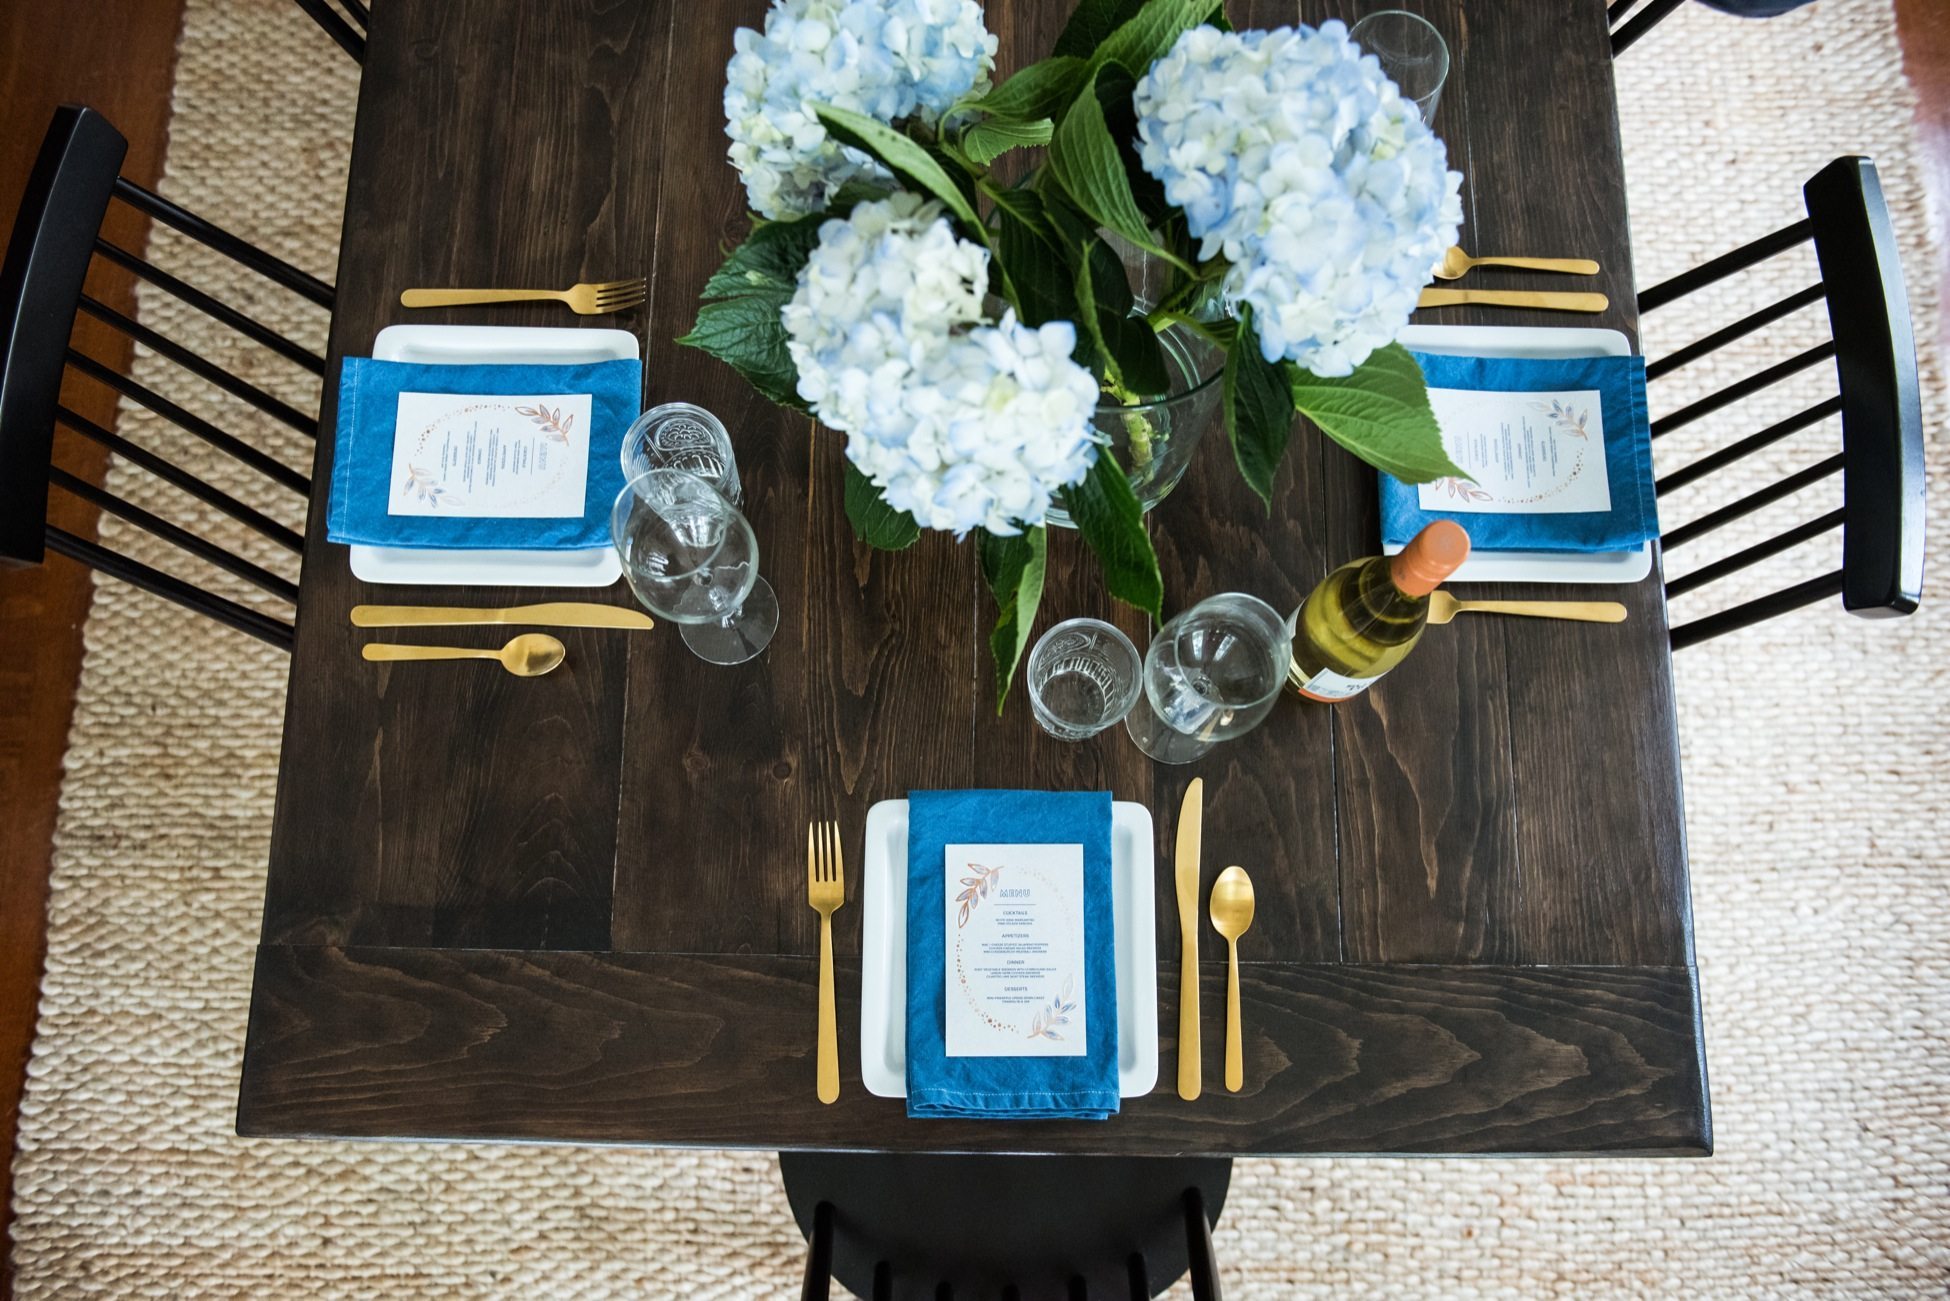 The Ultimate Backyard Dinner Party with Sutter Home and @cydconverse | Entertaining ideas, dinner party tips, party ideas and more!